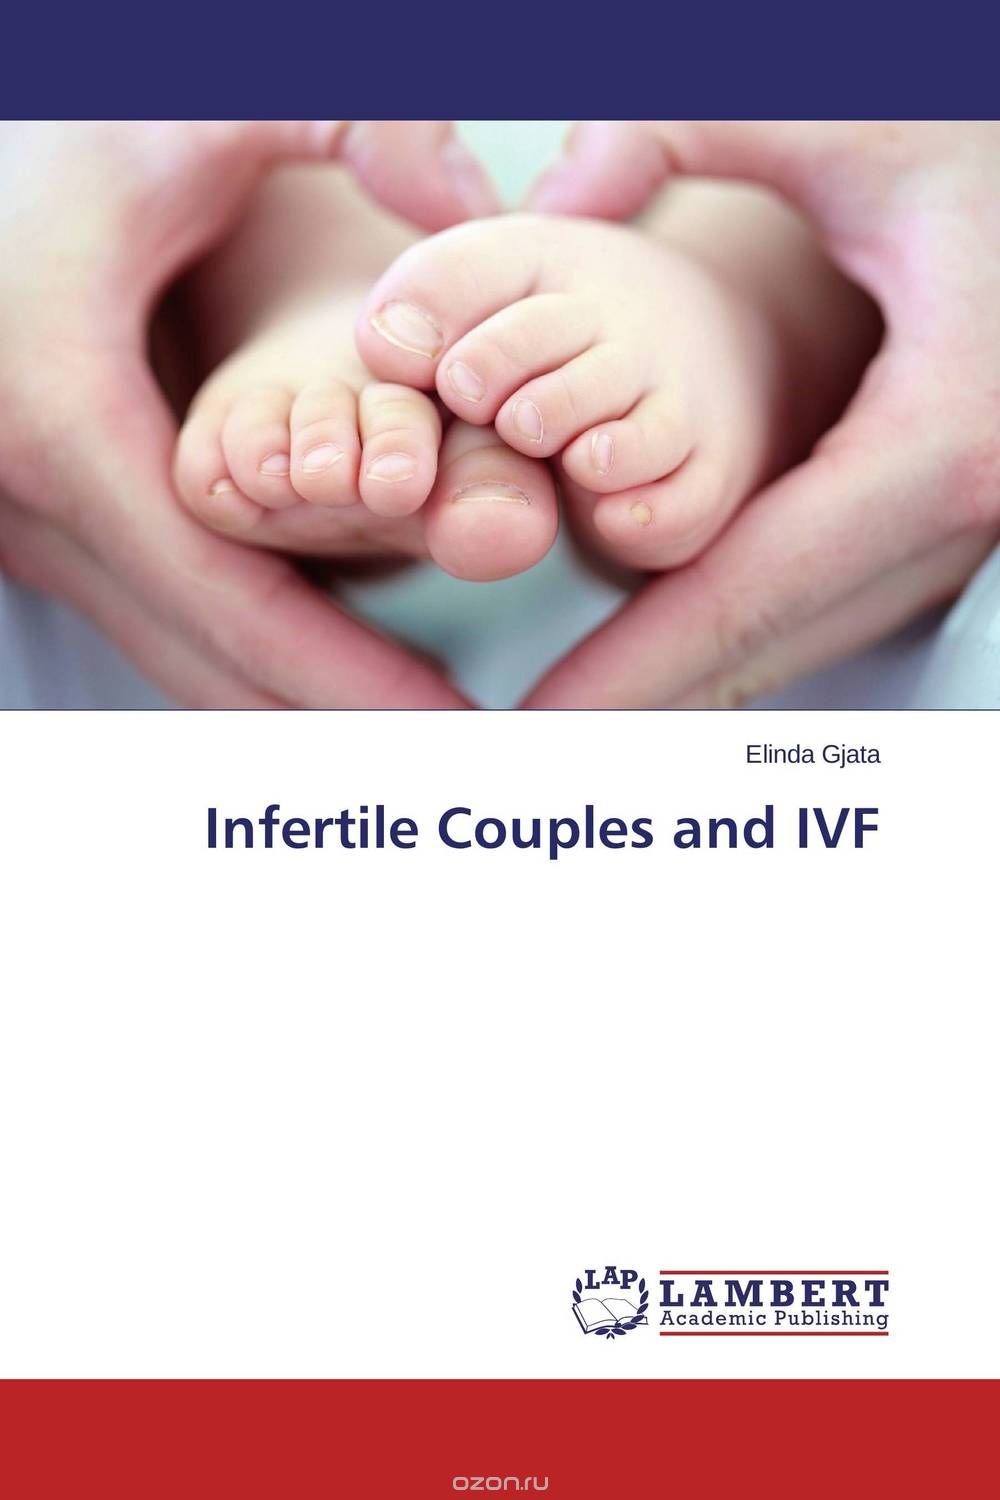 Infertile Couples and IVF